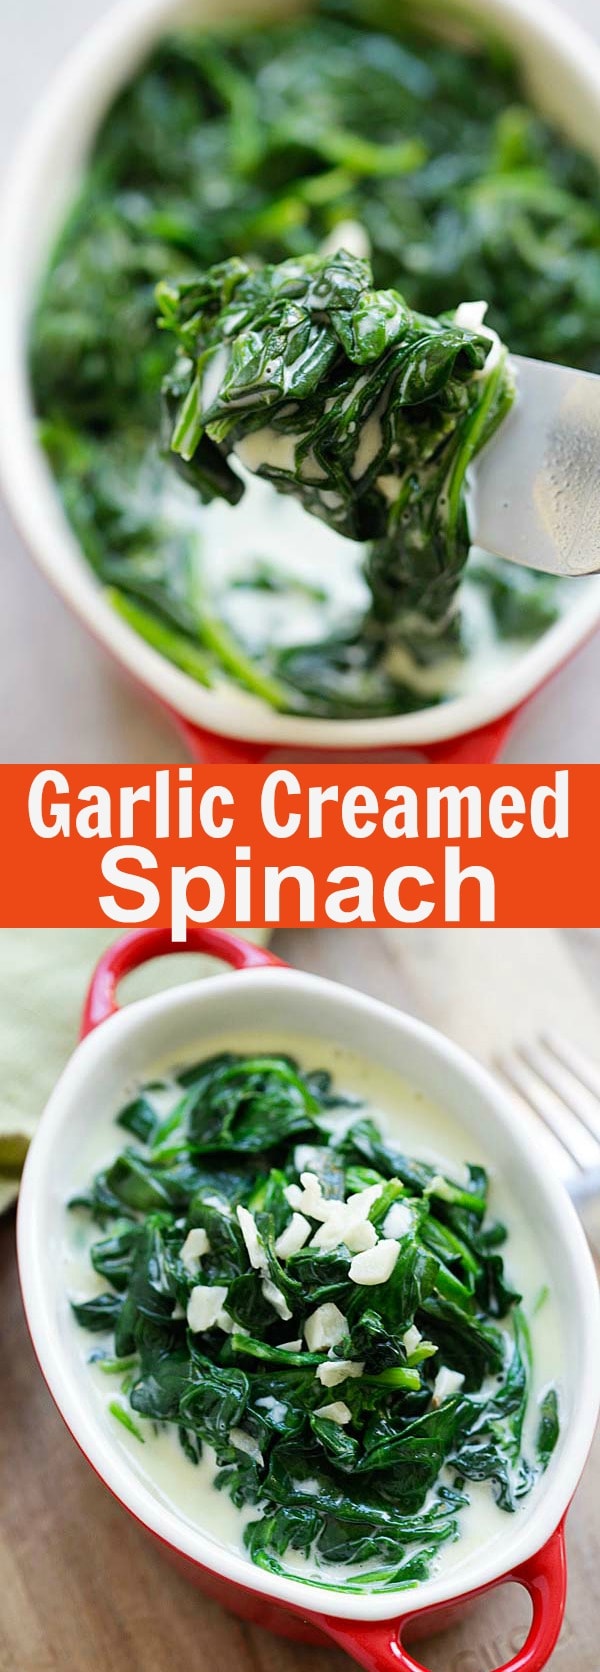 Garlic Creamed Spinach - Creamy garlicky spinach that you can make in 15 mins and takes only 5 ingredients. A healthy and delicious side dish | rasamalaysia.com